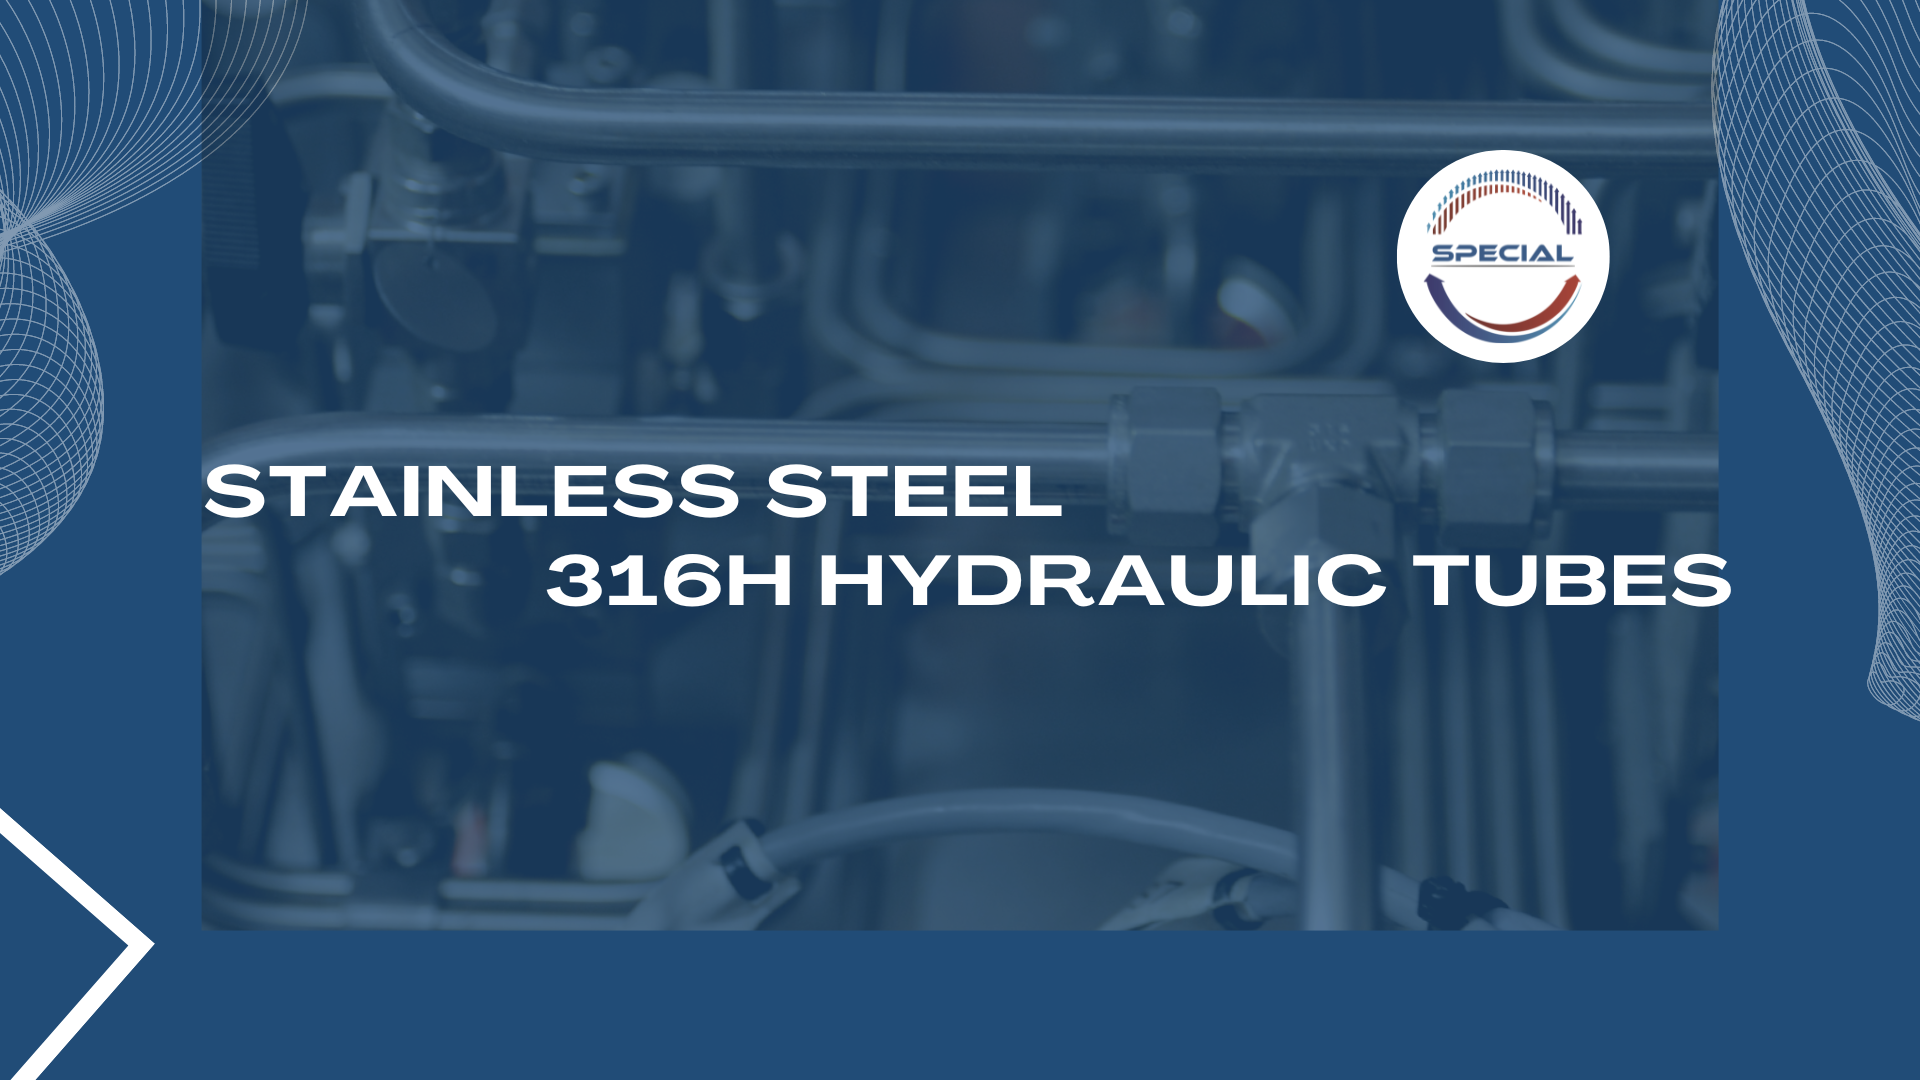 Stainless Steel 316 Hydraulic Tubes